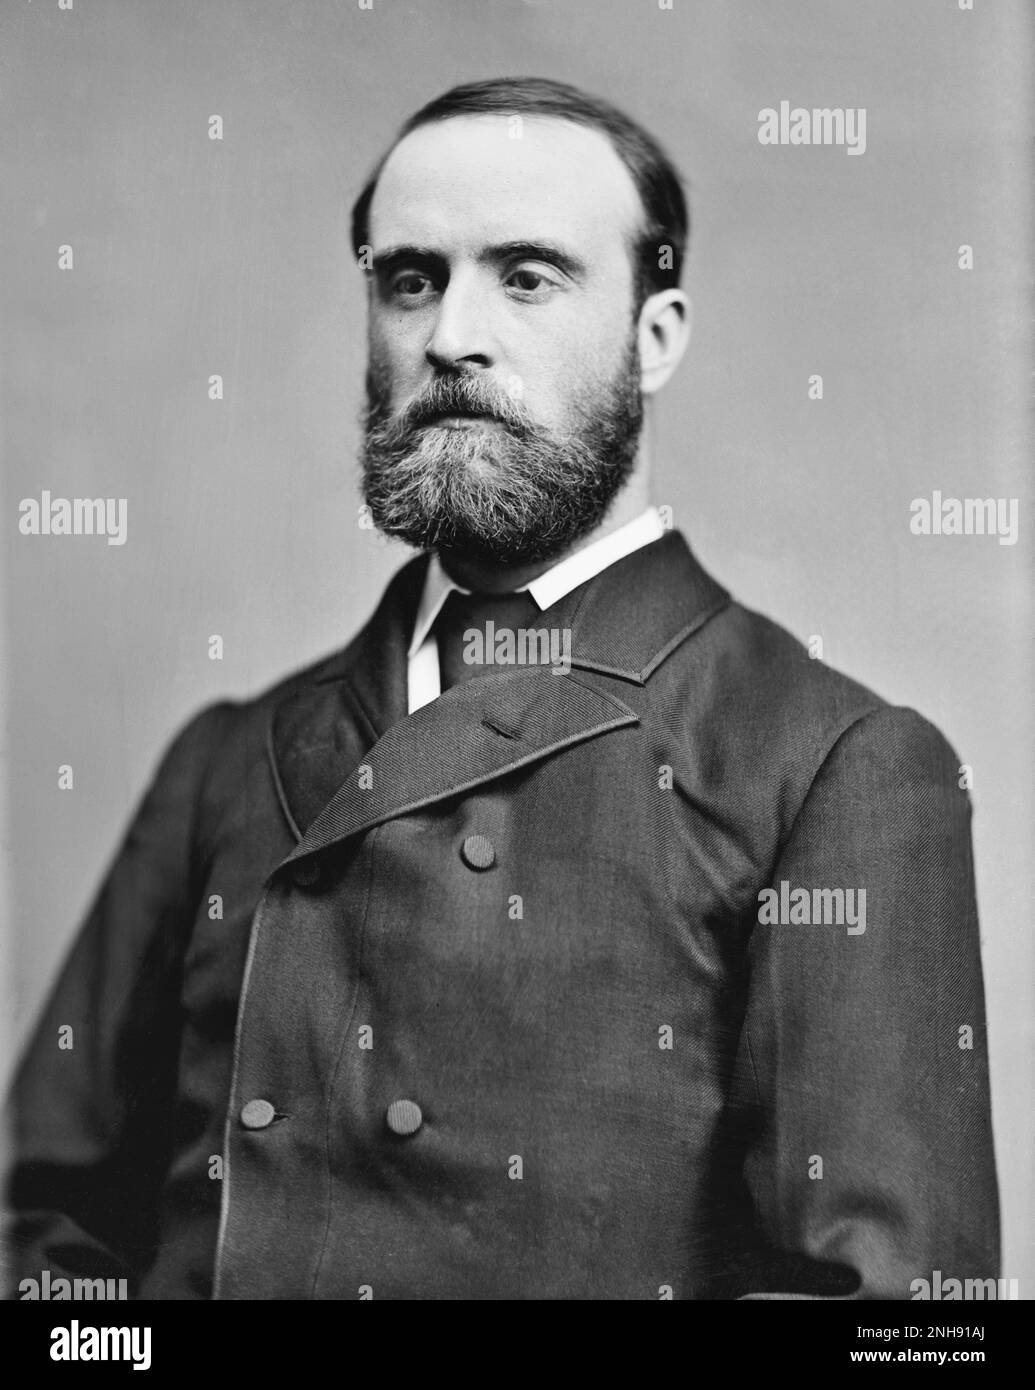 Charles Stewart Parnell (1846-1891) was an Irish nationalist politician who served as a Member of Parliament from 1875 to 1891, as well as Leader of the Home Rule League and Leader of the Irish Parliamentary Party. Stock Photo